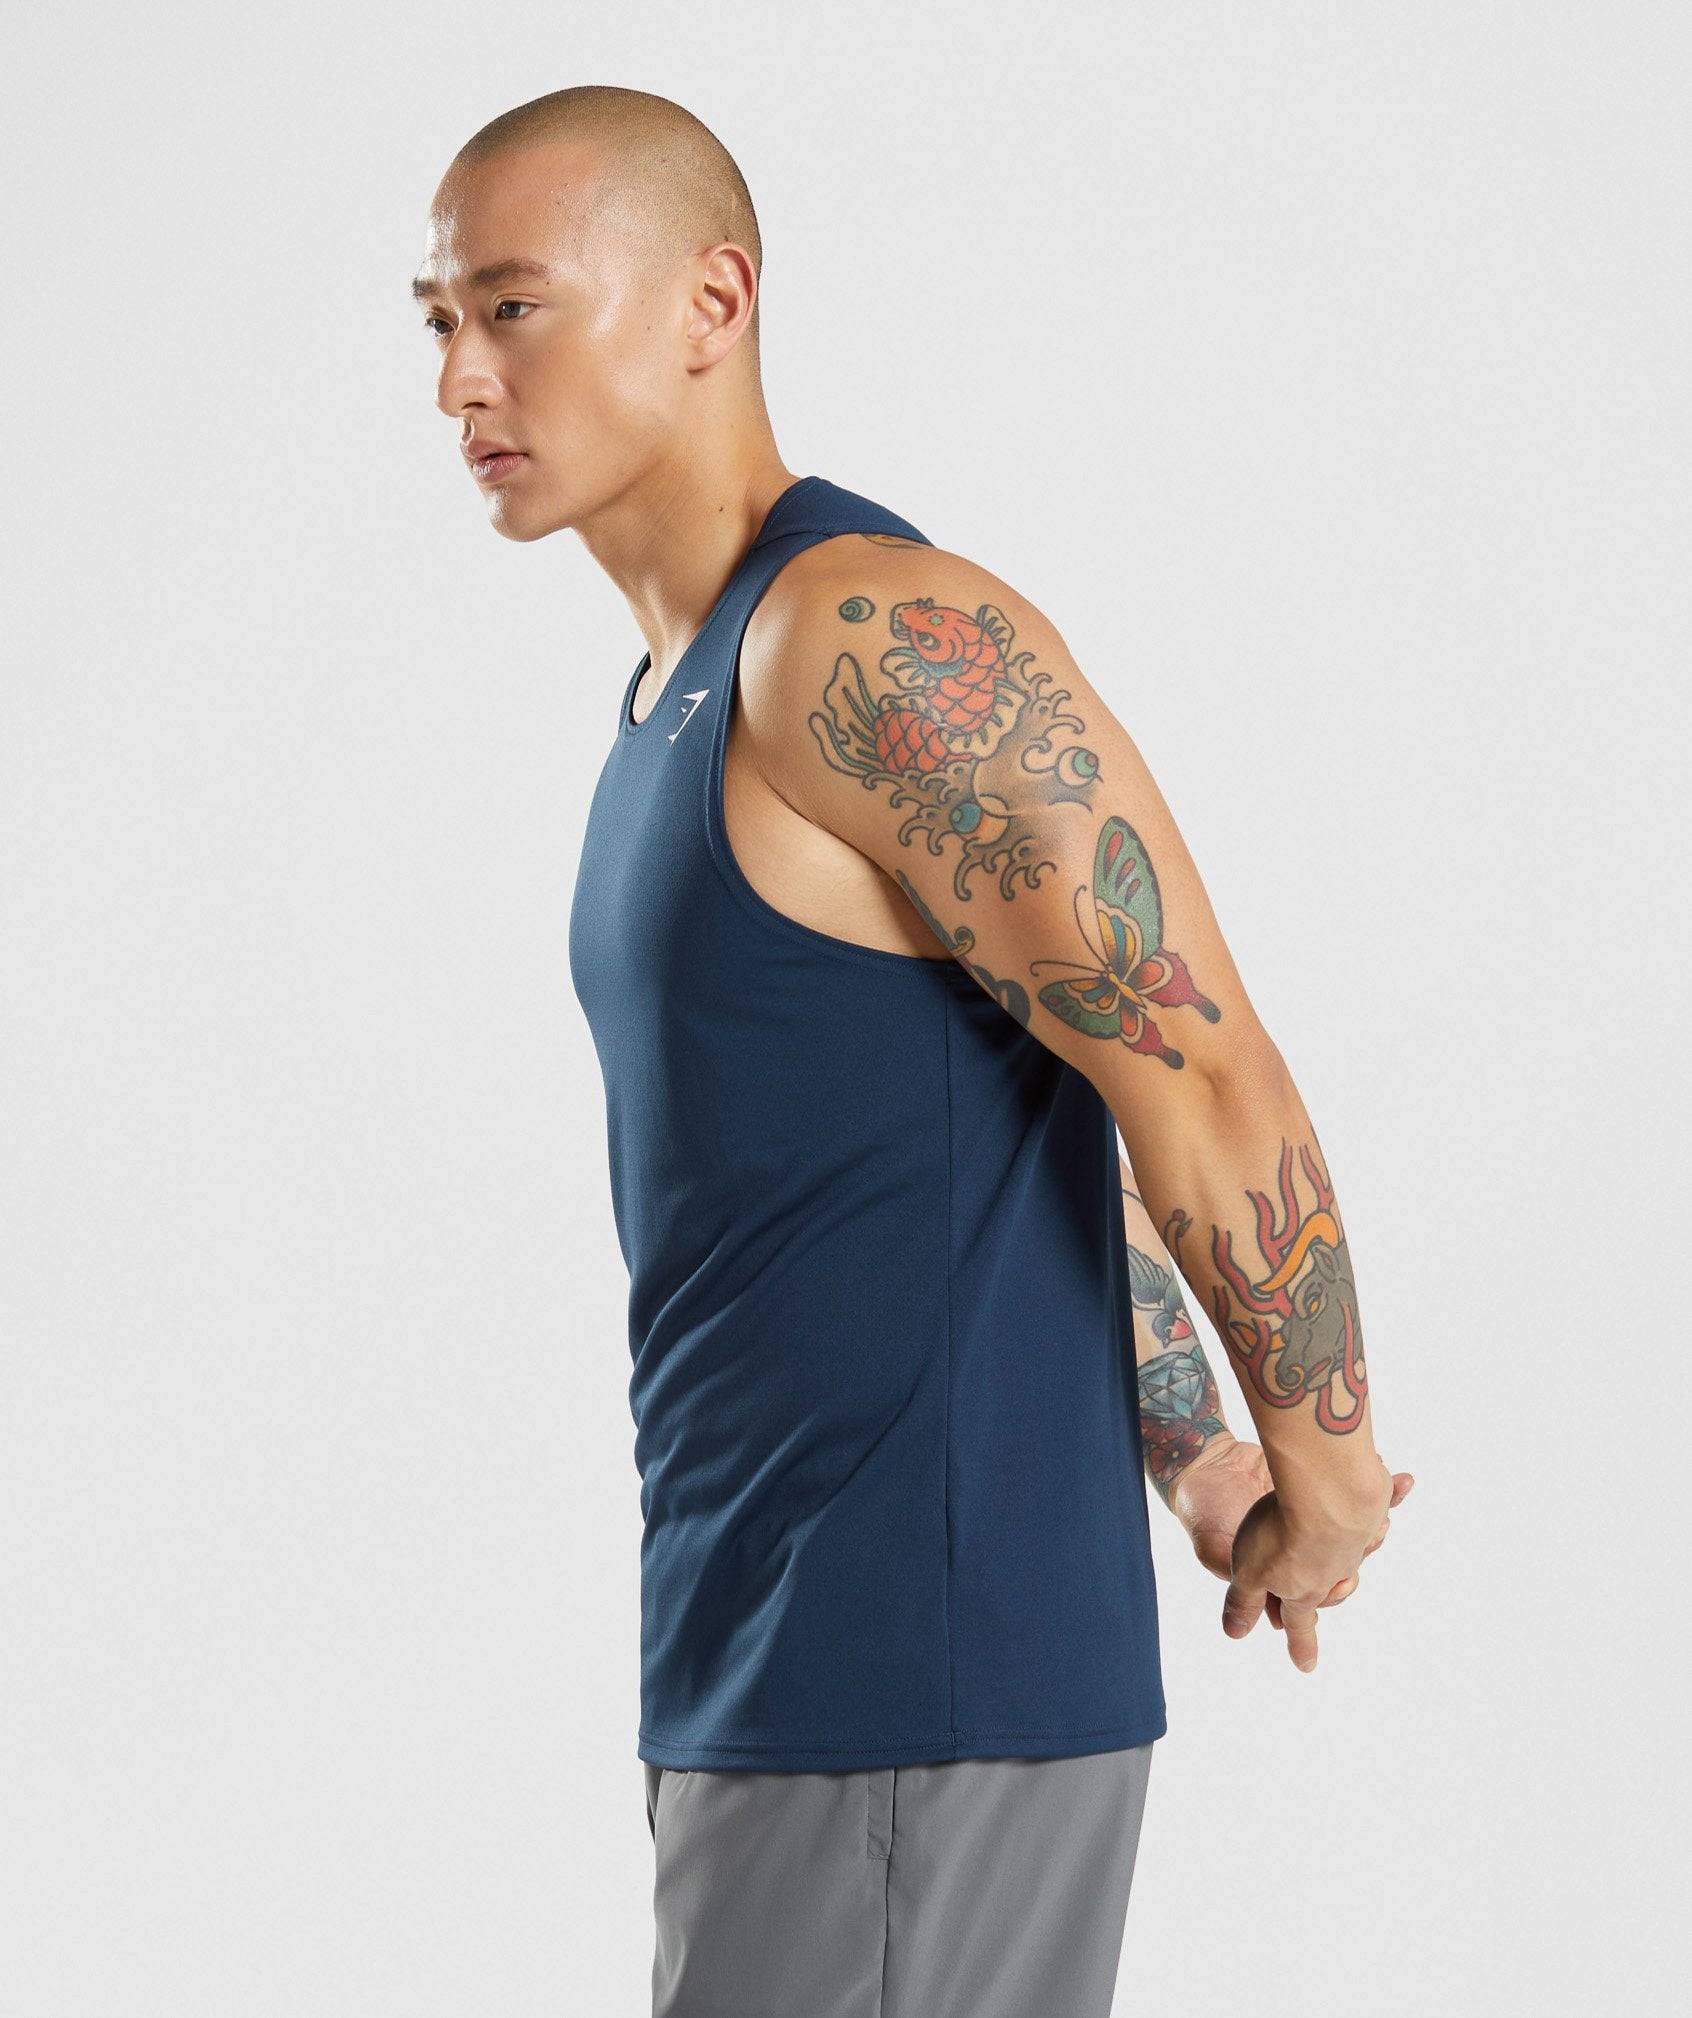 Arrival Tank in Navy - view 3